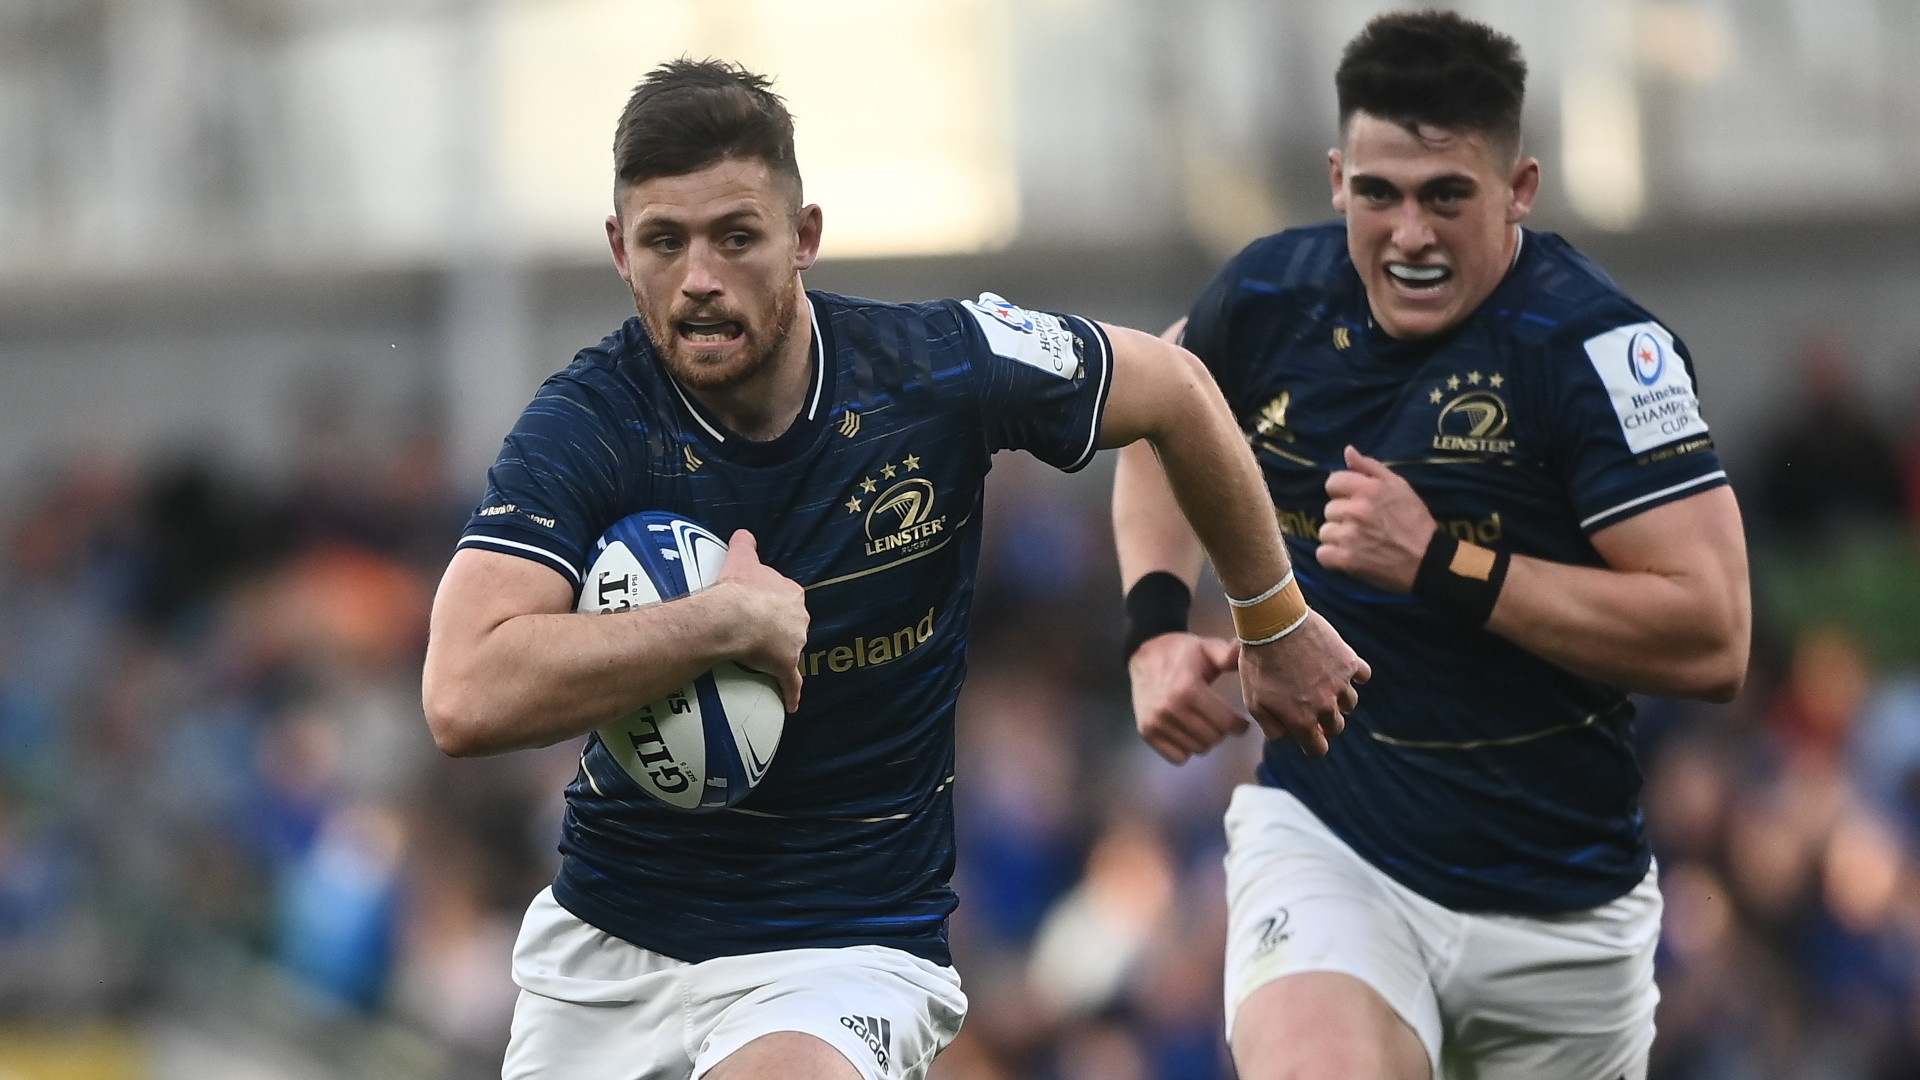 Leinster vs Toulouse live stream watch European Champions Cup semi-final rugby online TechRadar